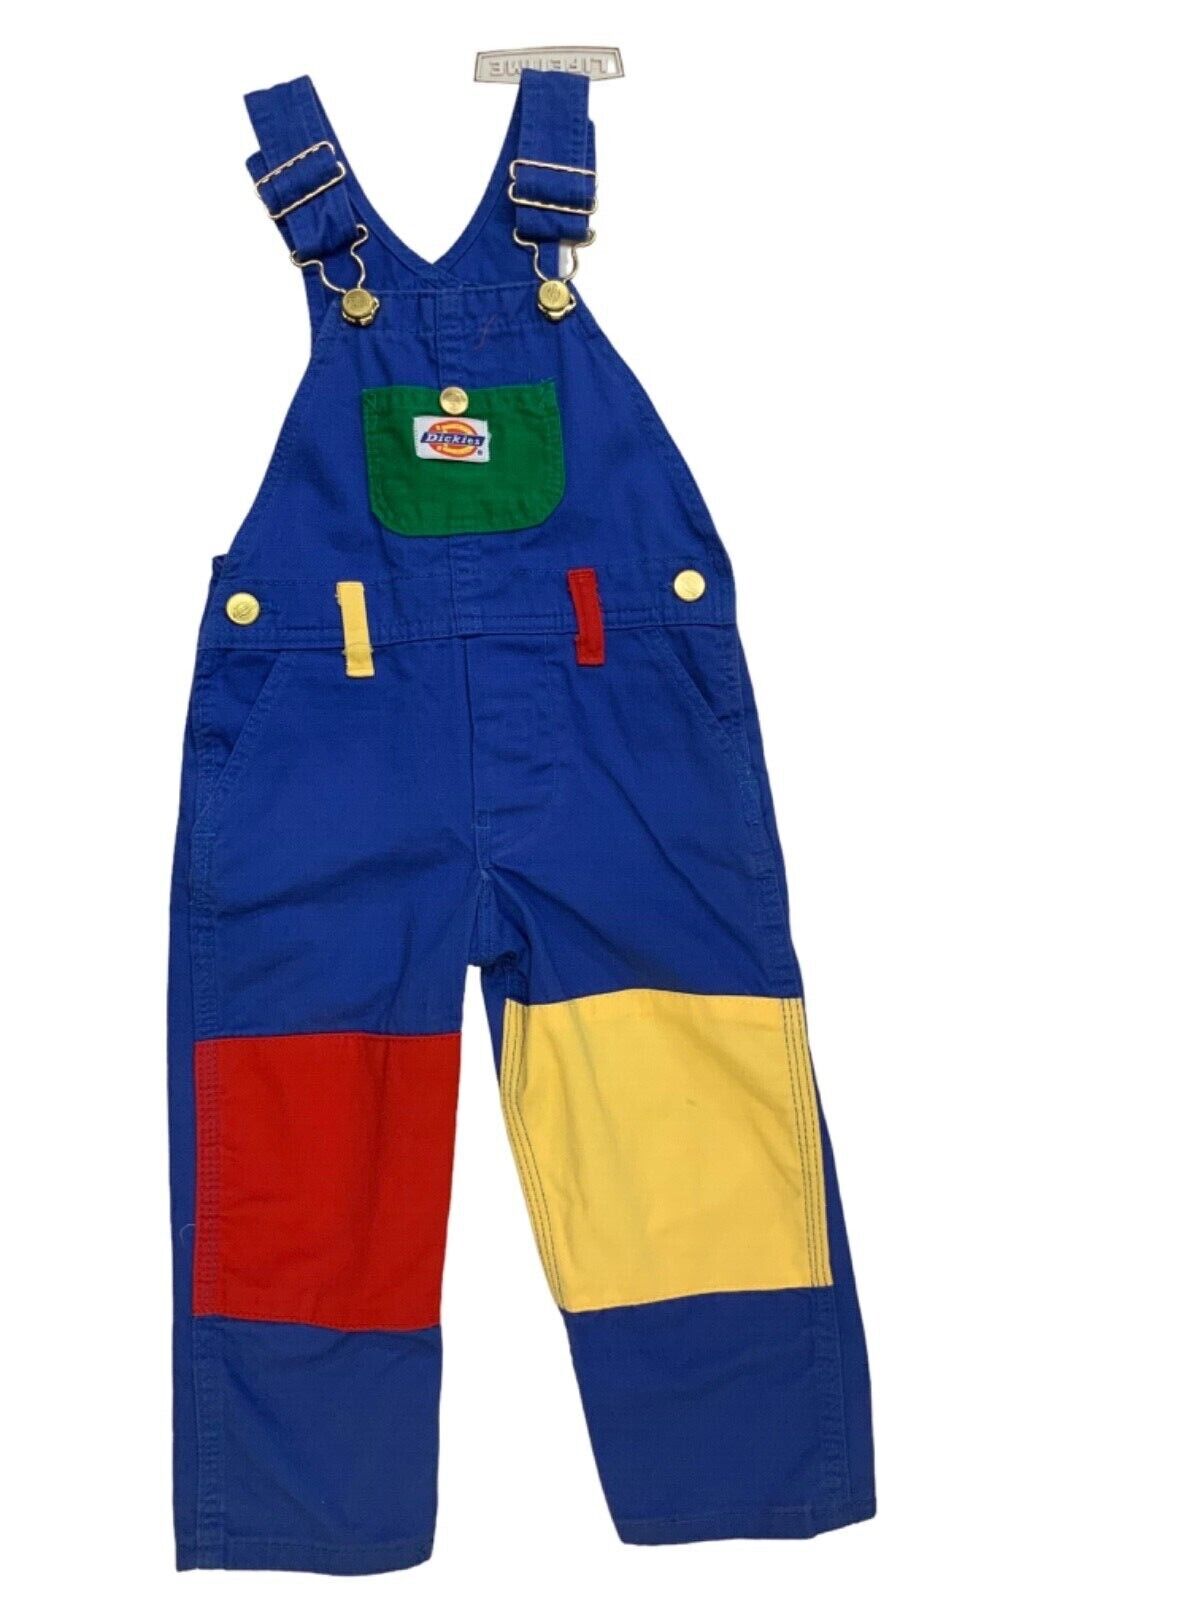 Dickies, Boys Blue with Green,Yellow,Red patch Long Pants Overalls (7-12 months)